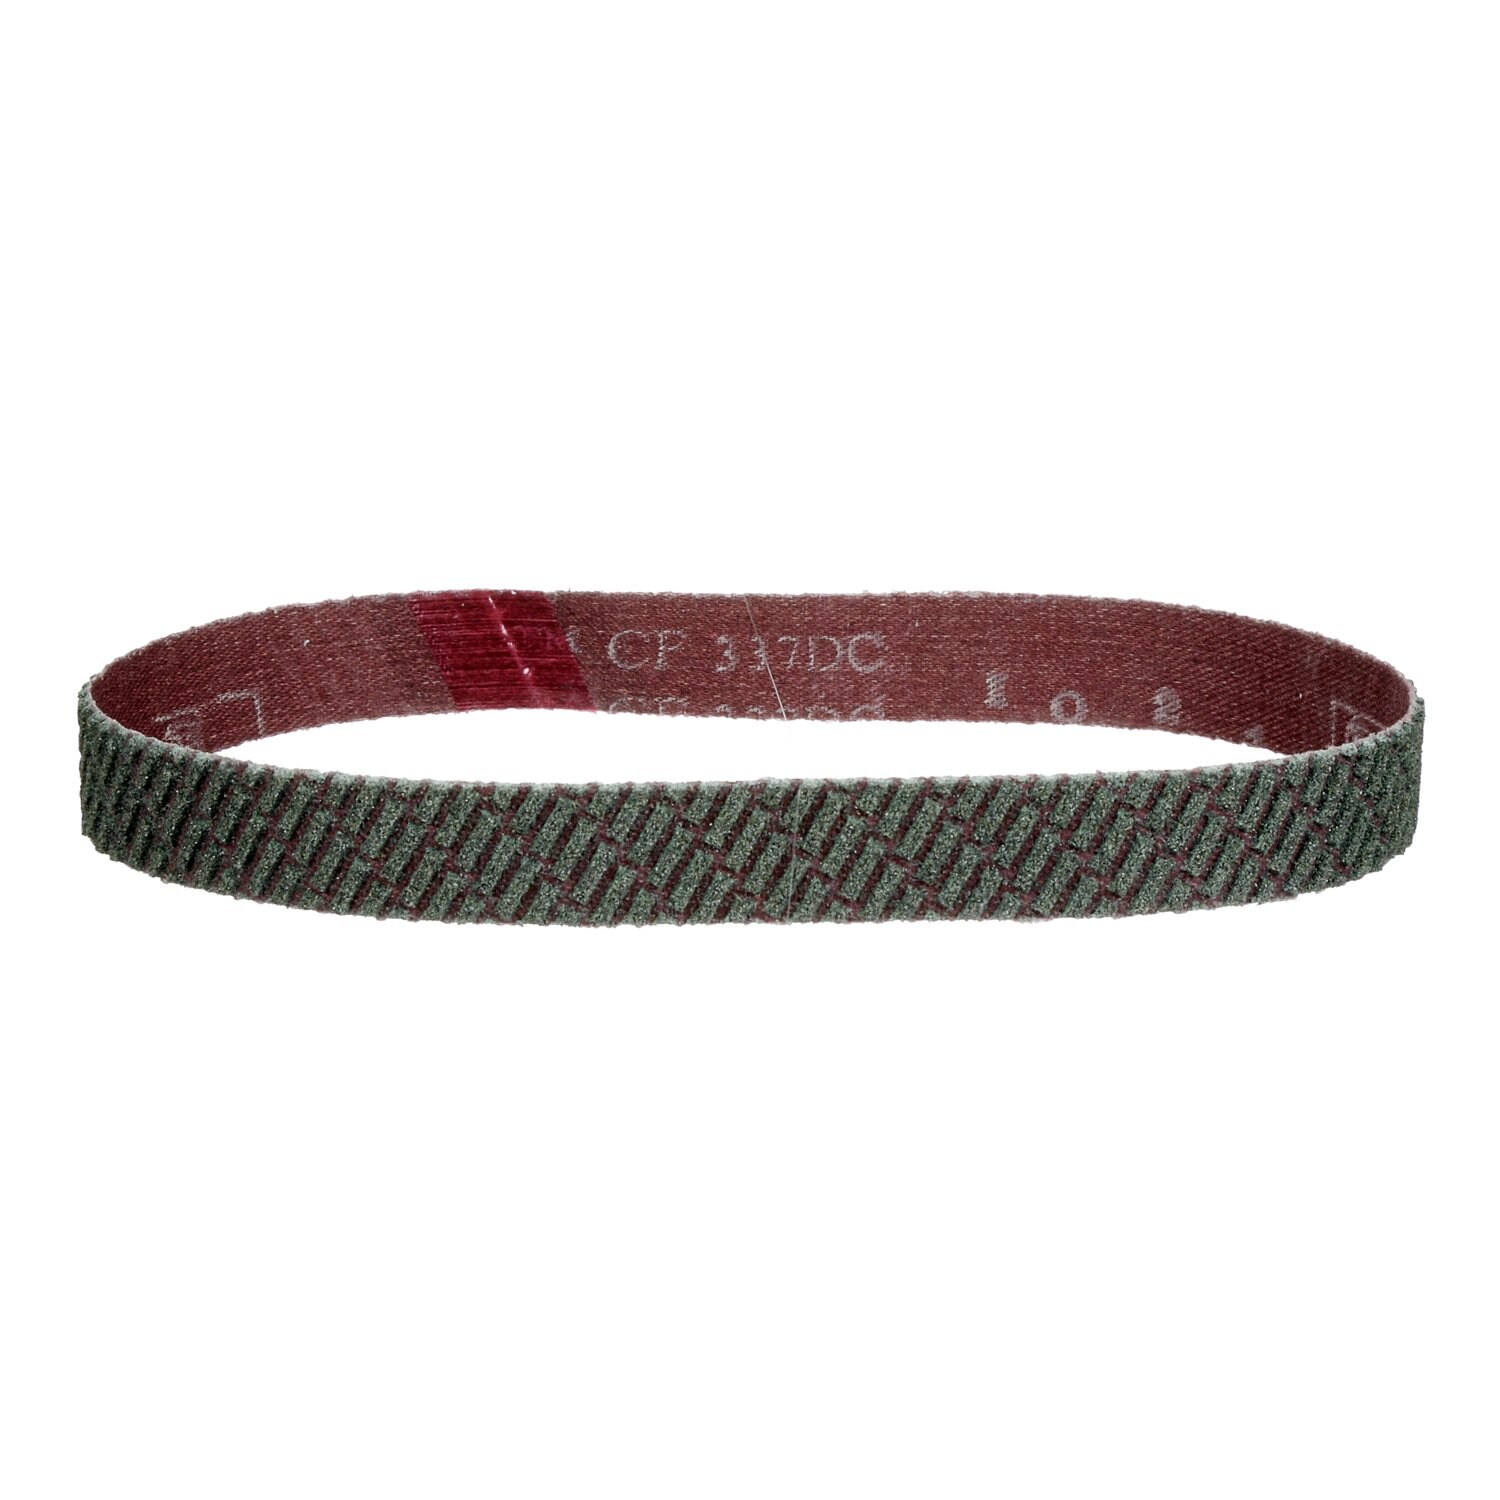 7100192699 - 3M Trizact Cloth Belt 337DC, A300 X-weight, 2 in x 90 in, 20 ea/Case